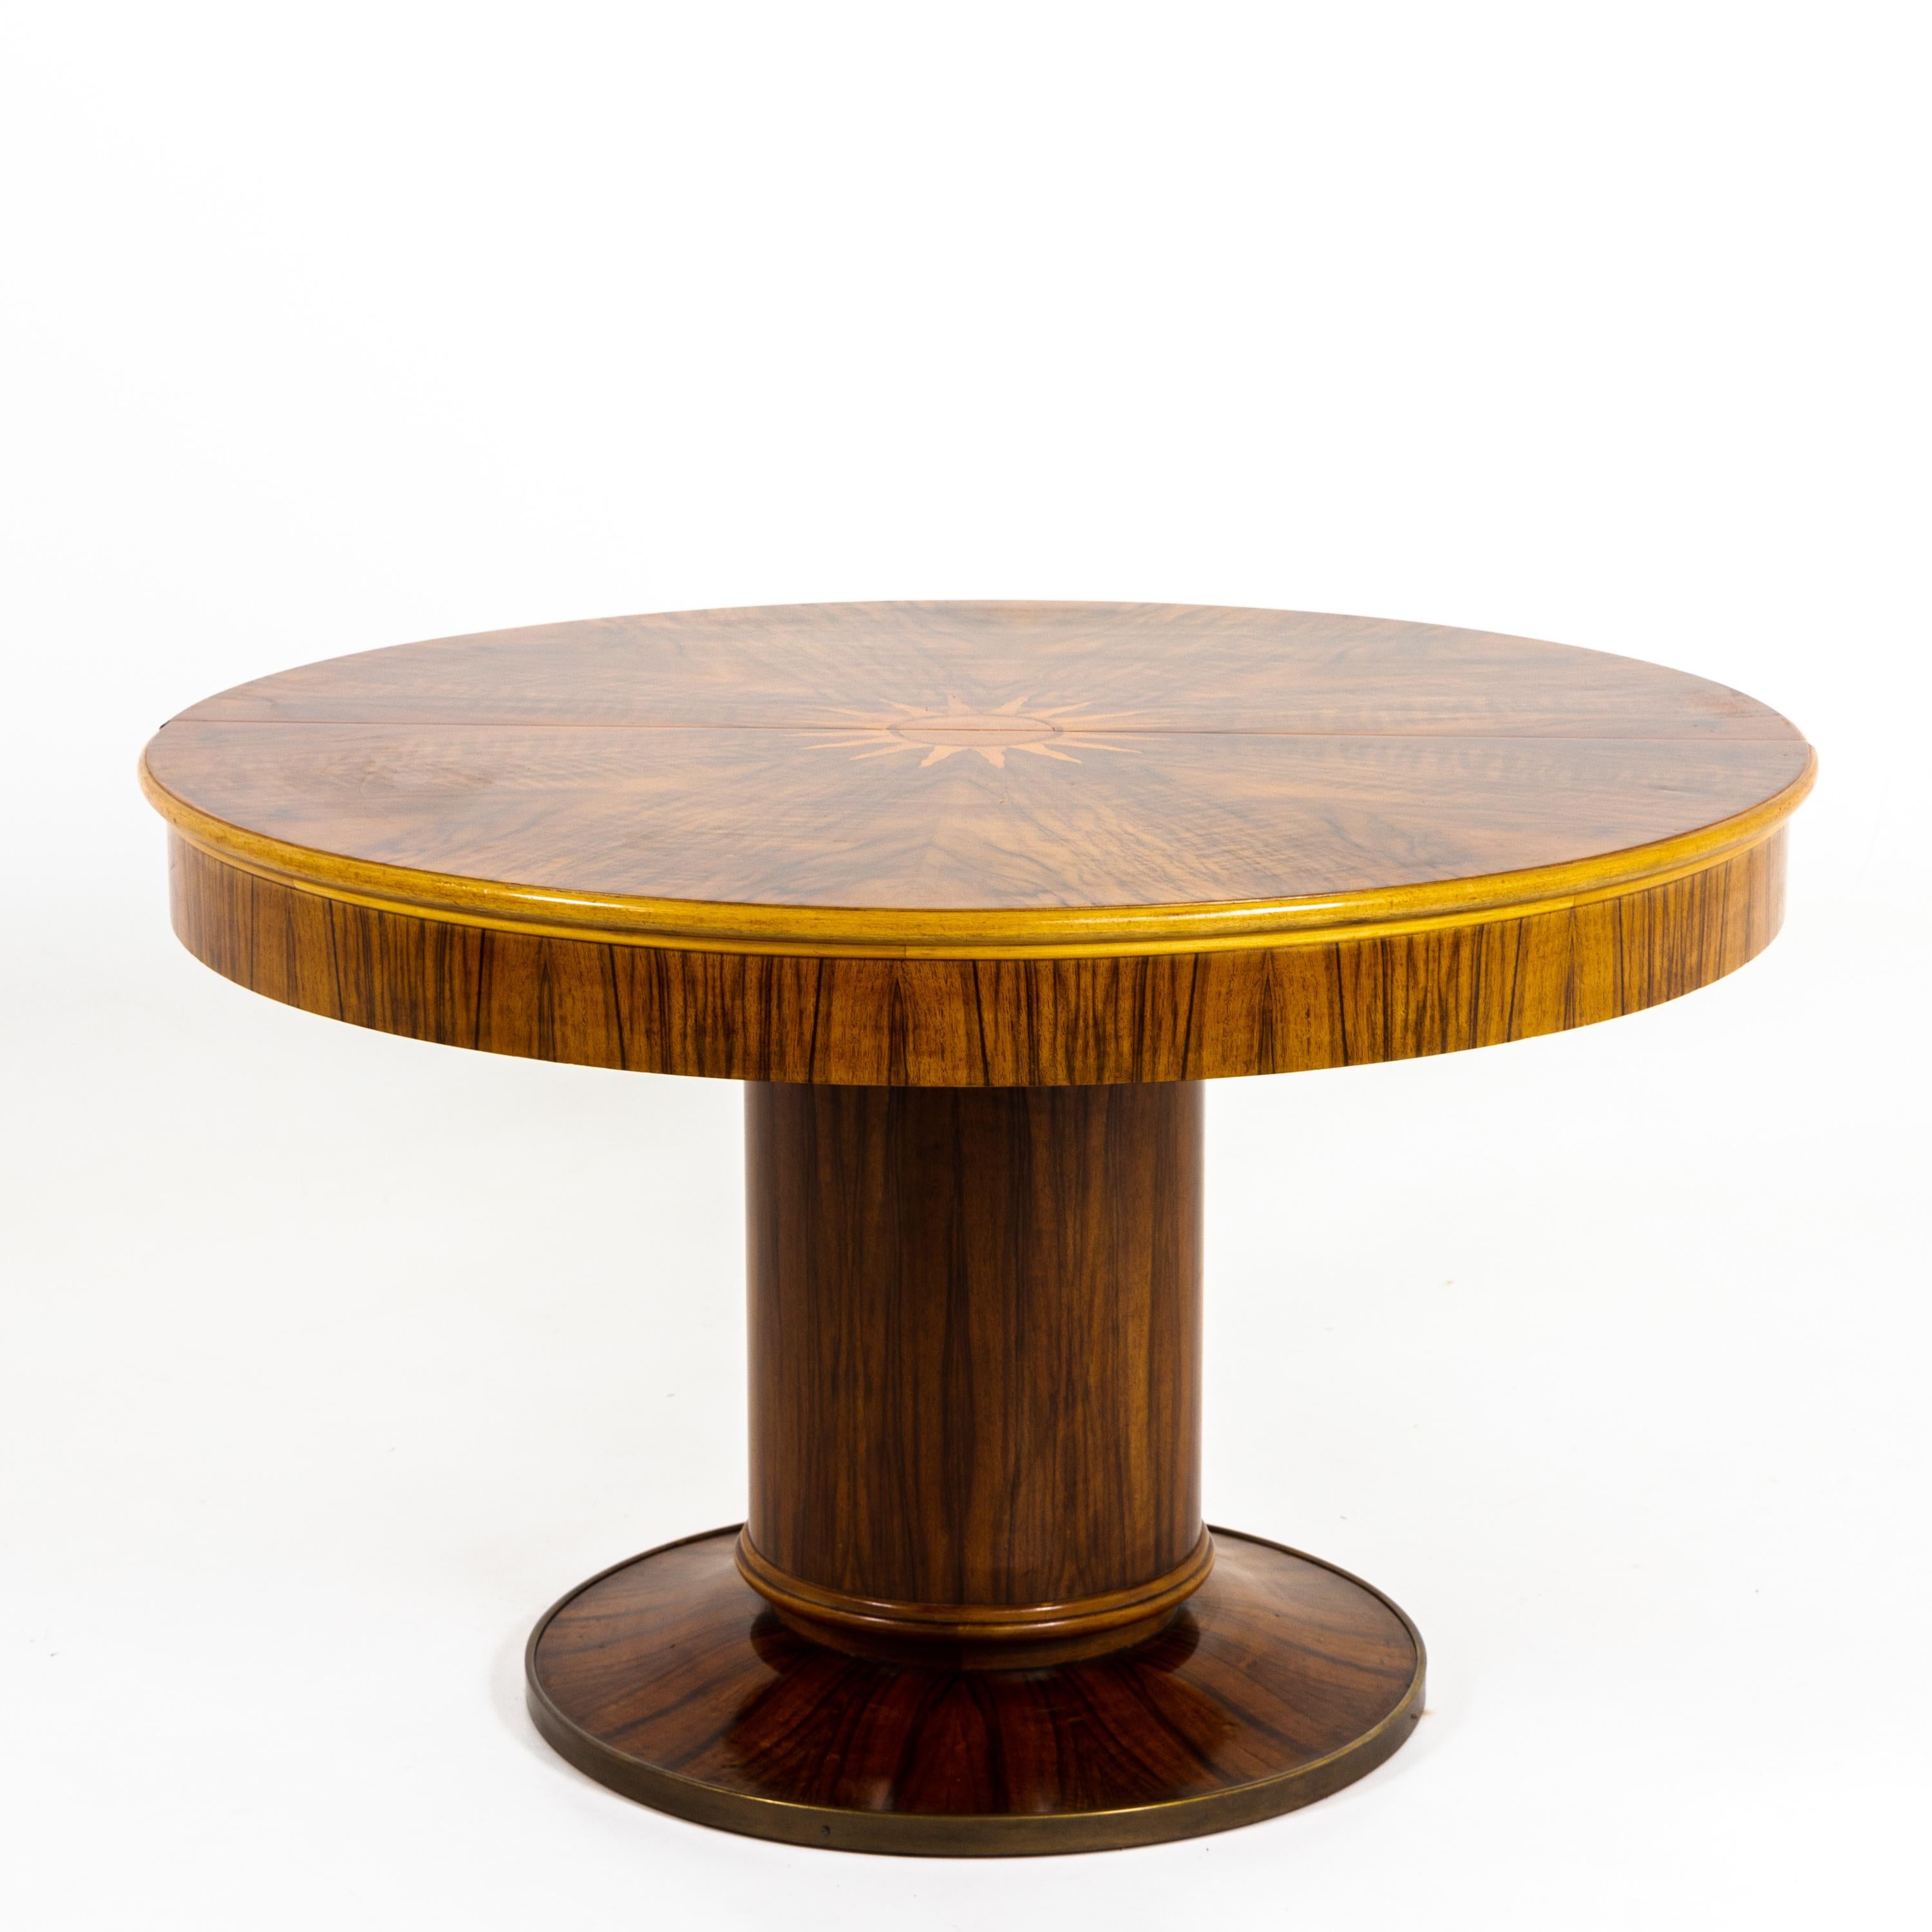 Art Deco extension table with round column base and table top, in walnut veneer with central inlay in the shape of a sun. The table was professionally refurbished and hand polished.